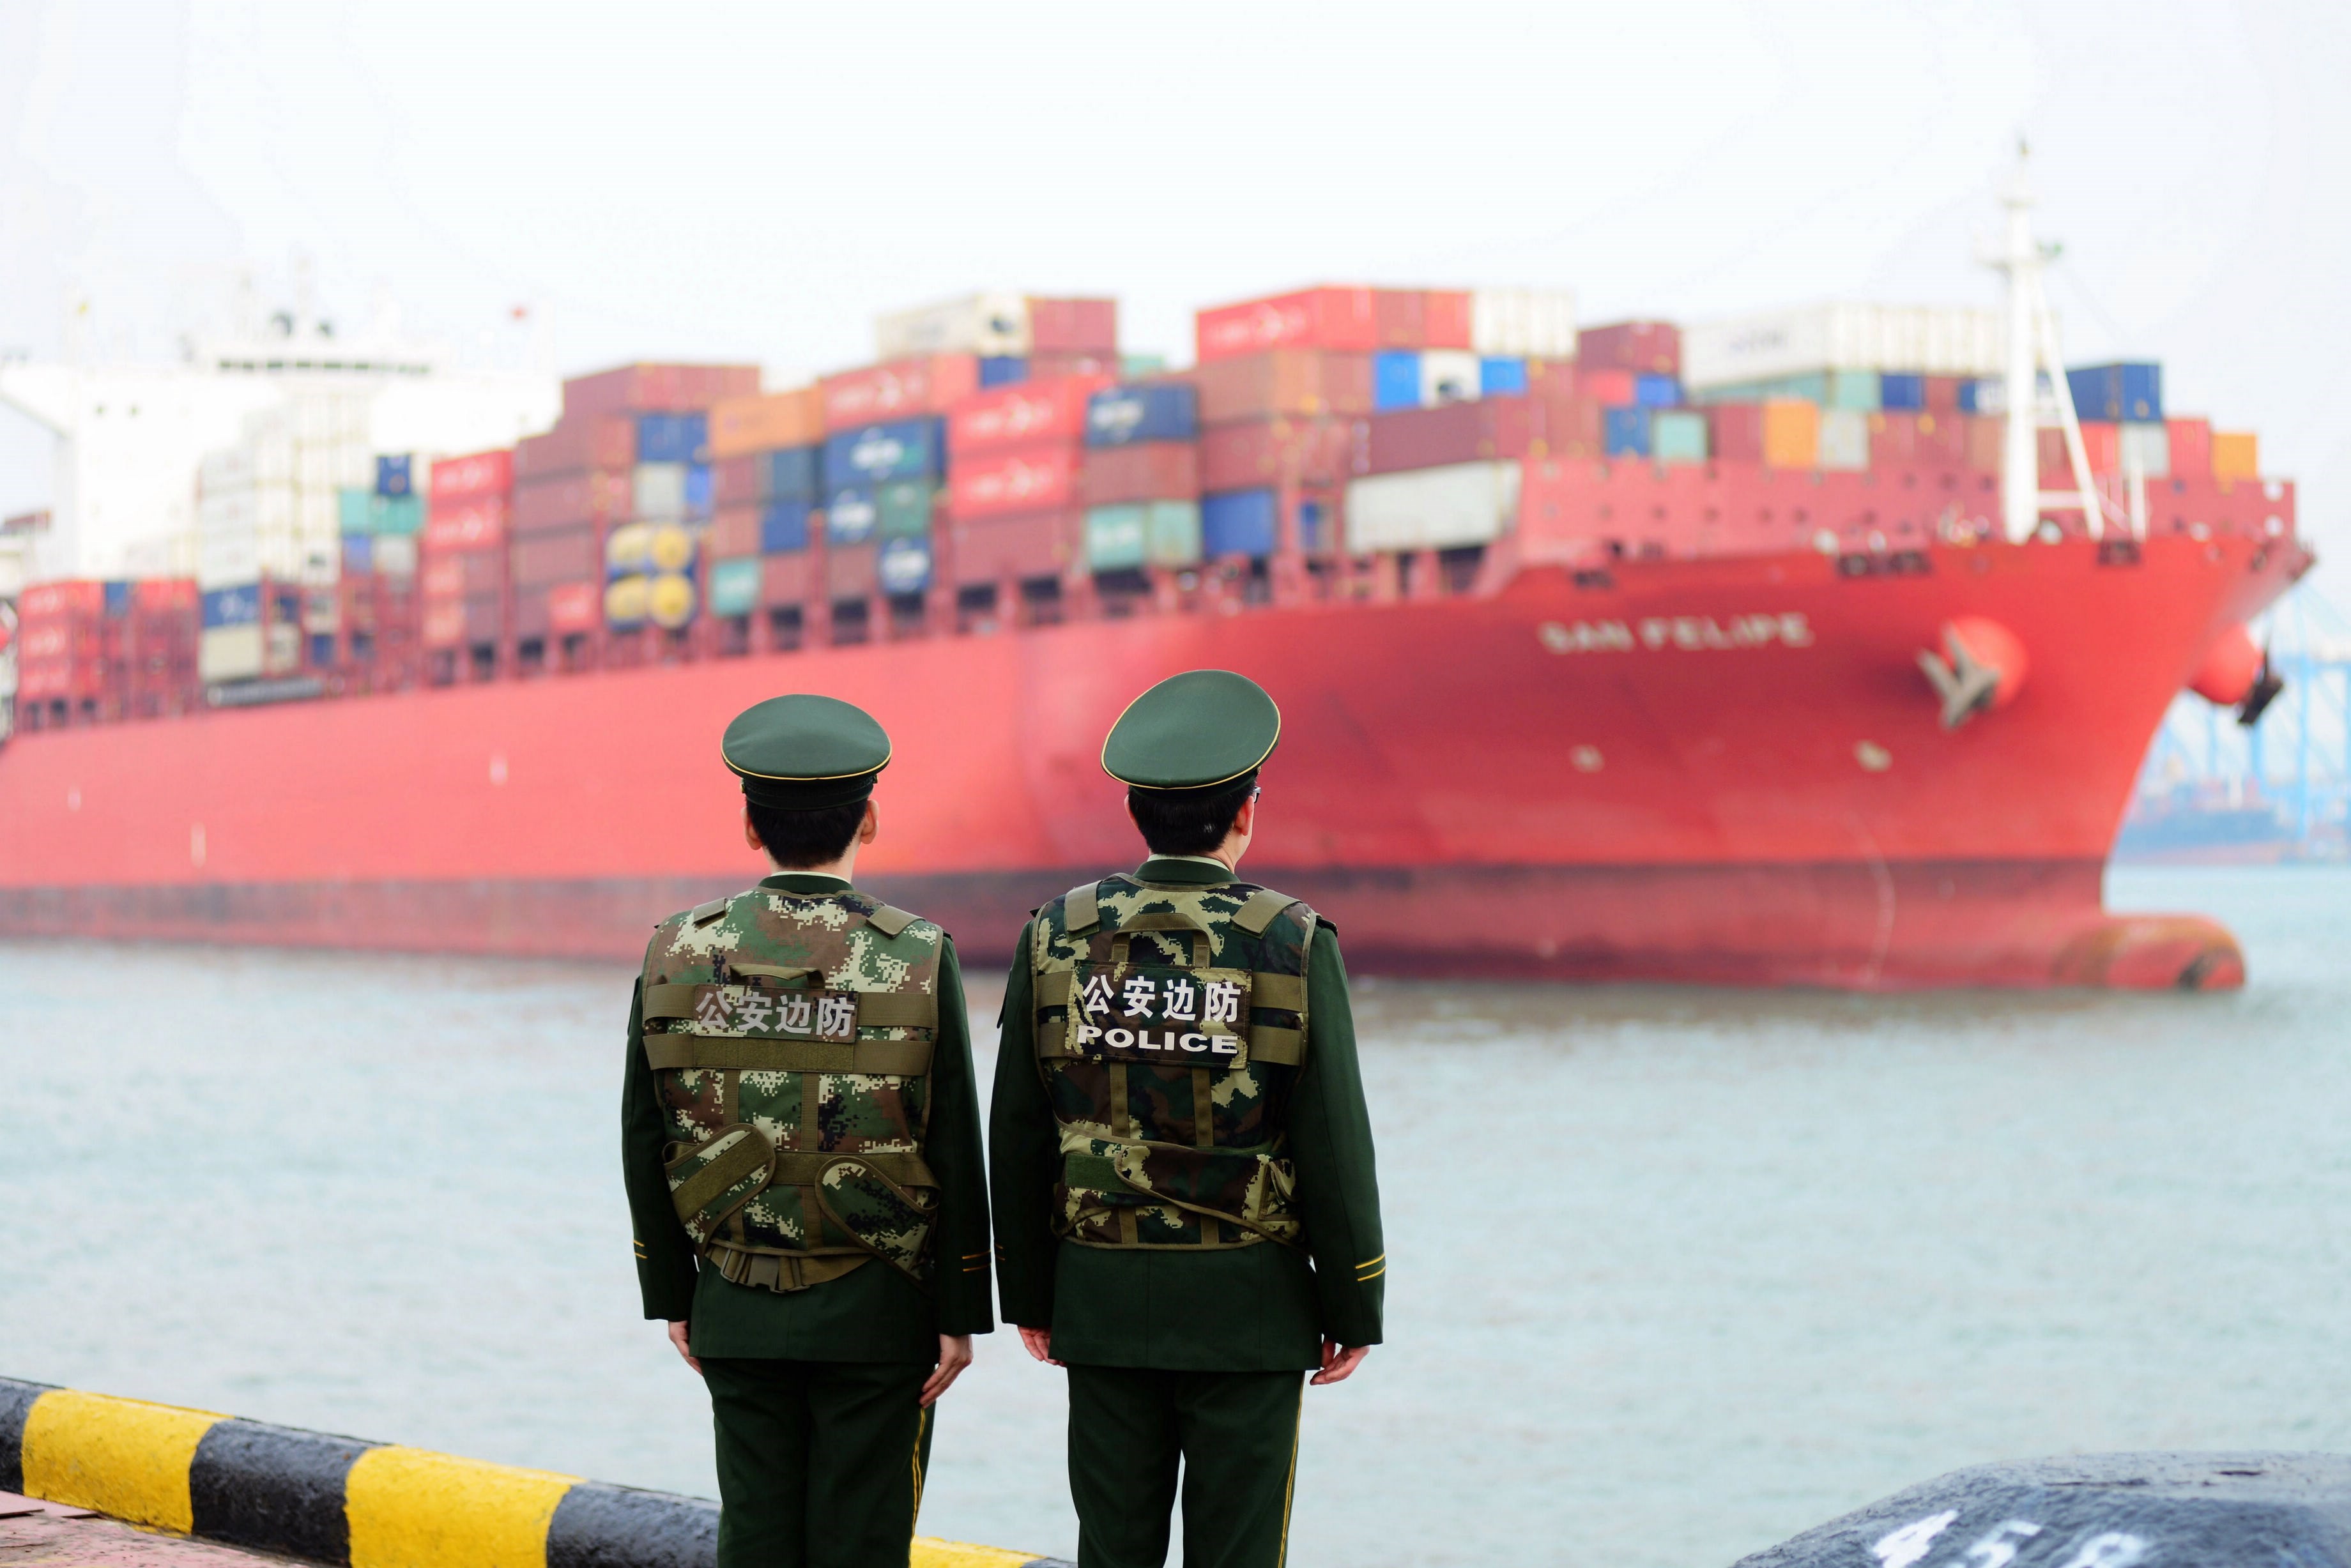 Border guards work at a container port in Qingdao, Shandong province, China, Mar. 08, 2018. EPA-EFE/FILE/YU FANGPING CHINA OUT
